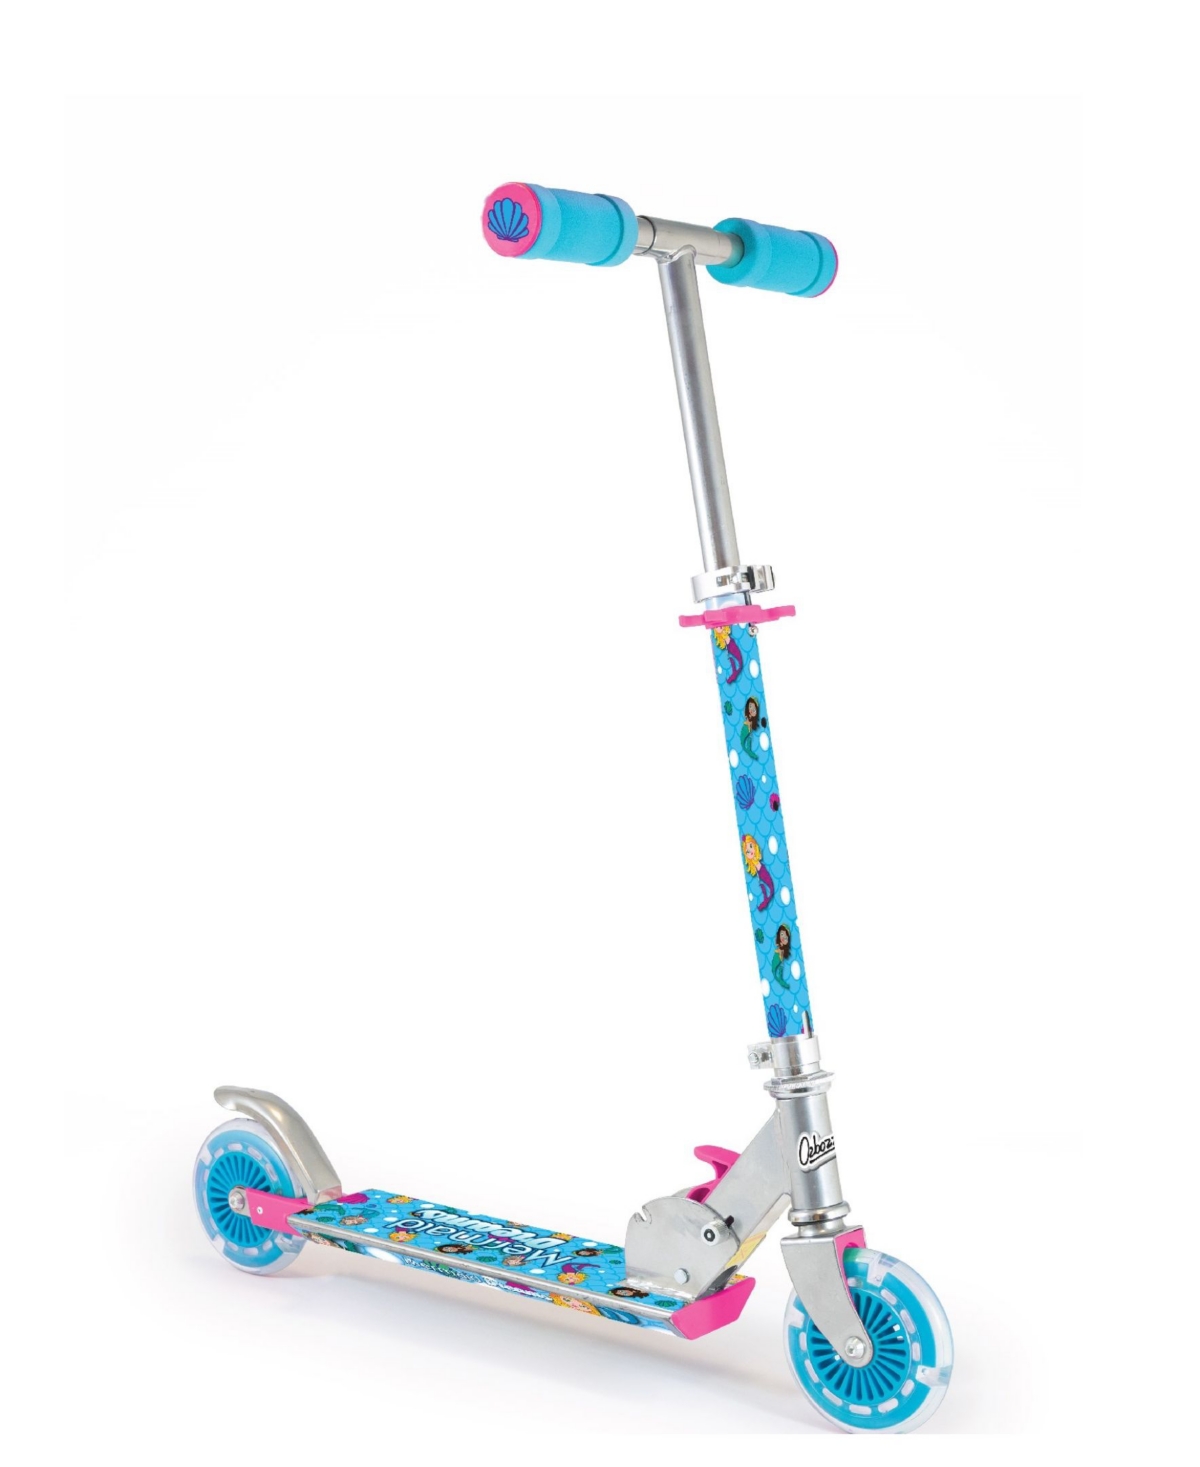 Ozbozz Mermaid Foldable Scooter In Multi